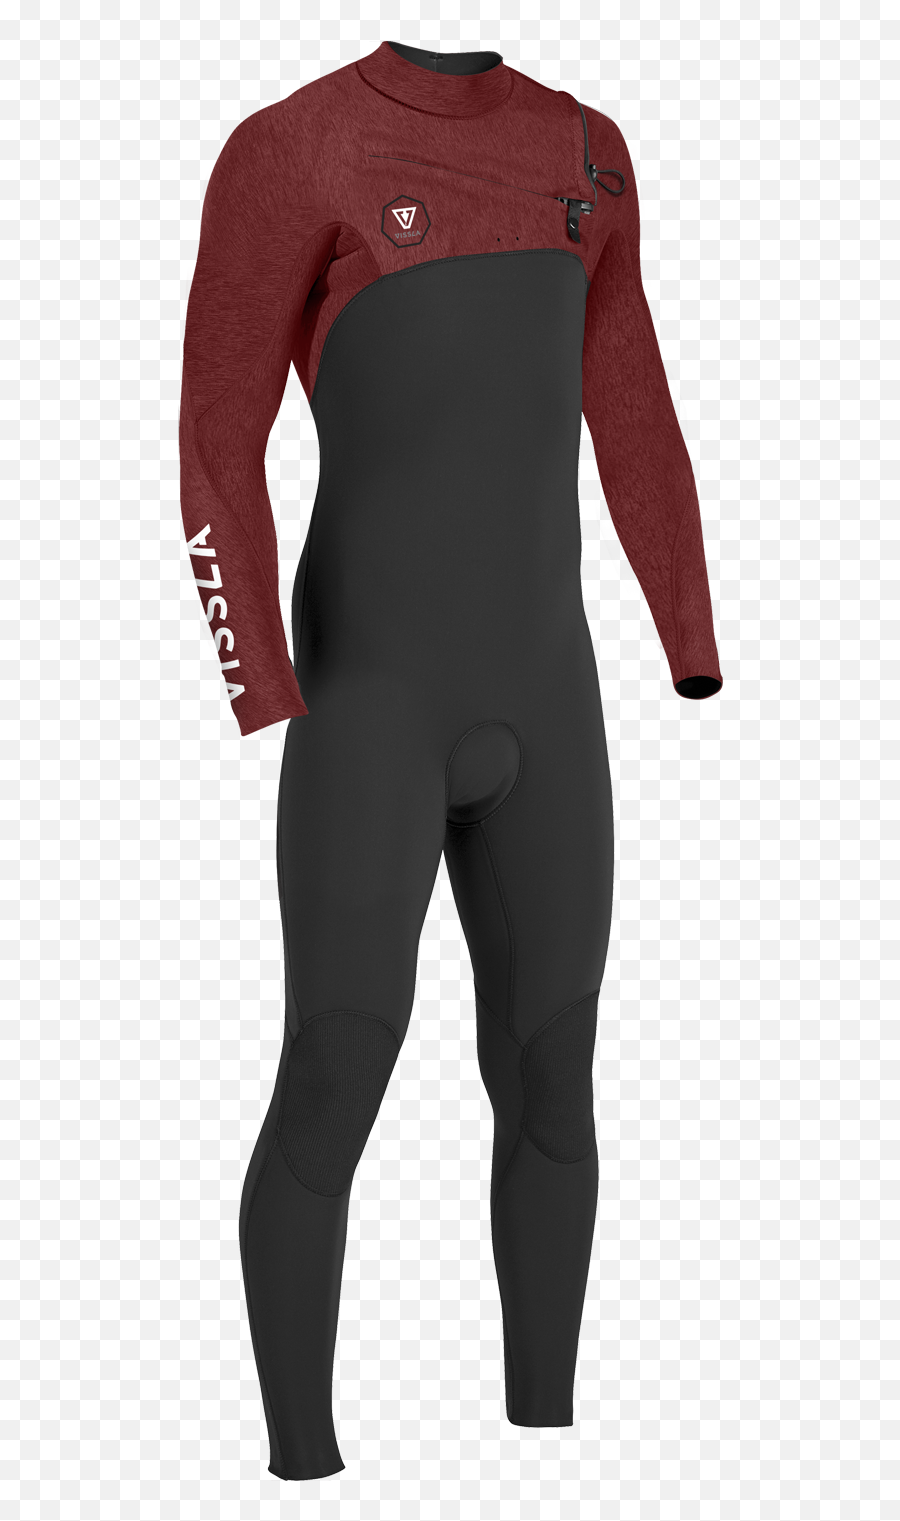 7 Seas 32 Boys Full Suit Red Heather Vissla - Red Wetsuits 4 3 Emoji,Emoticon Keyboard With Overalls